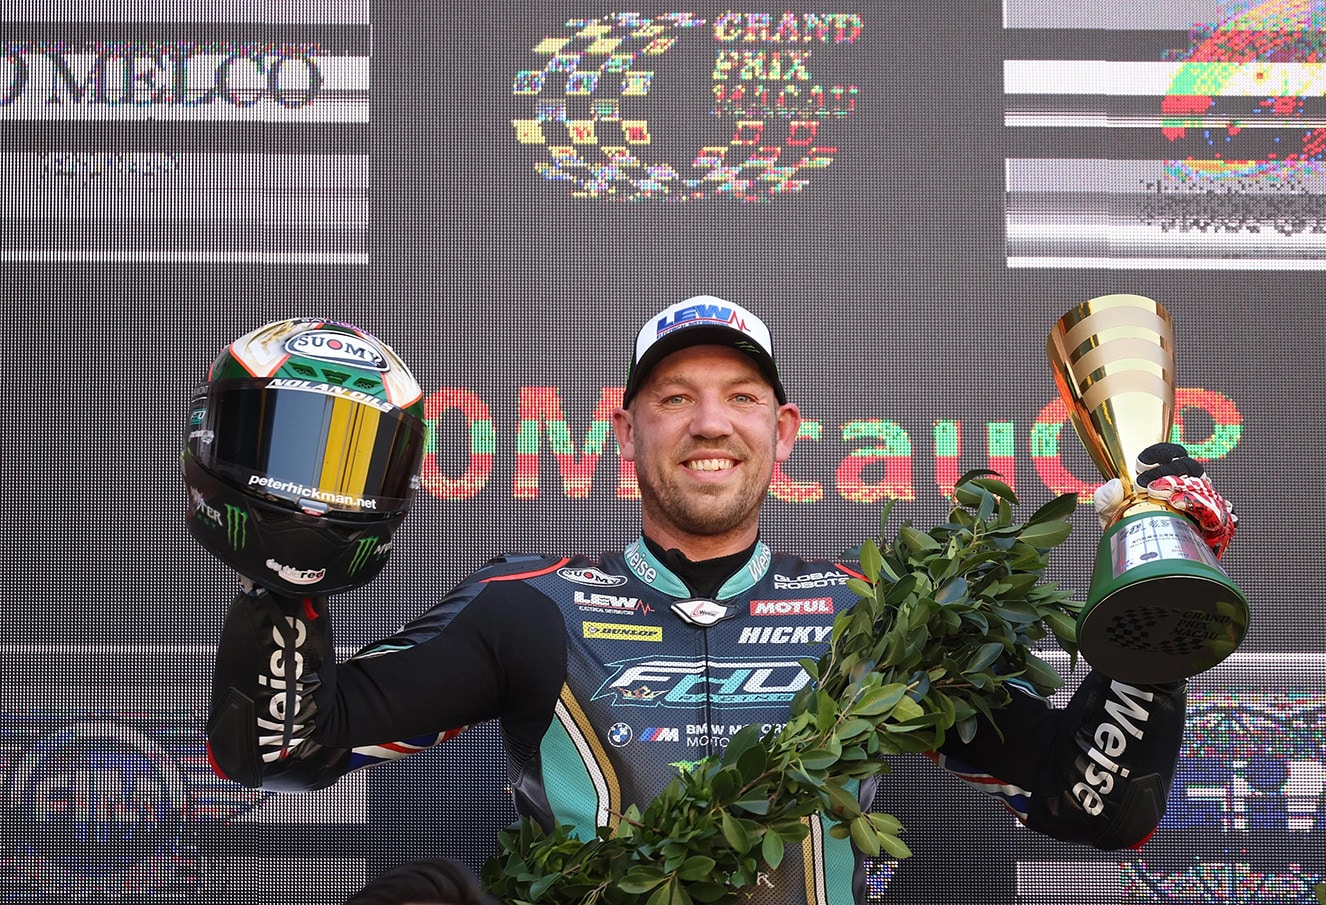 2023 Macau Grand Prix  Hickman, Rutter and Todd head up entry as